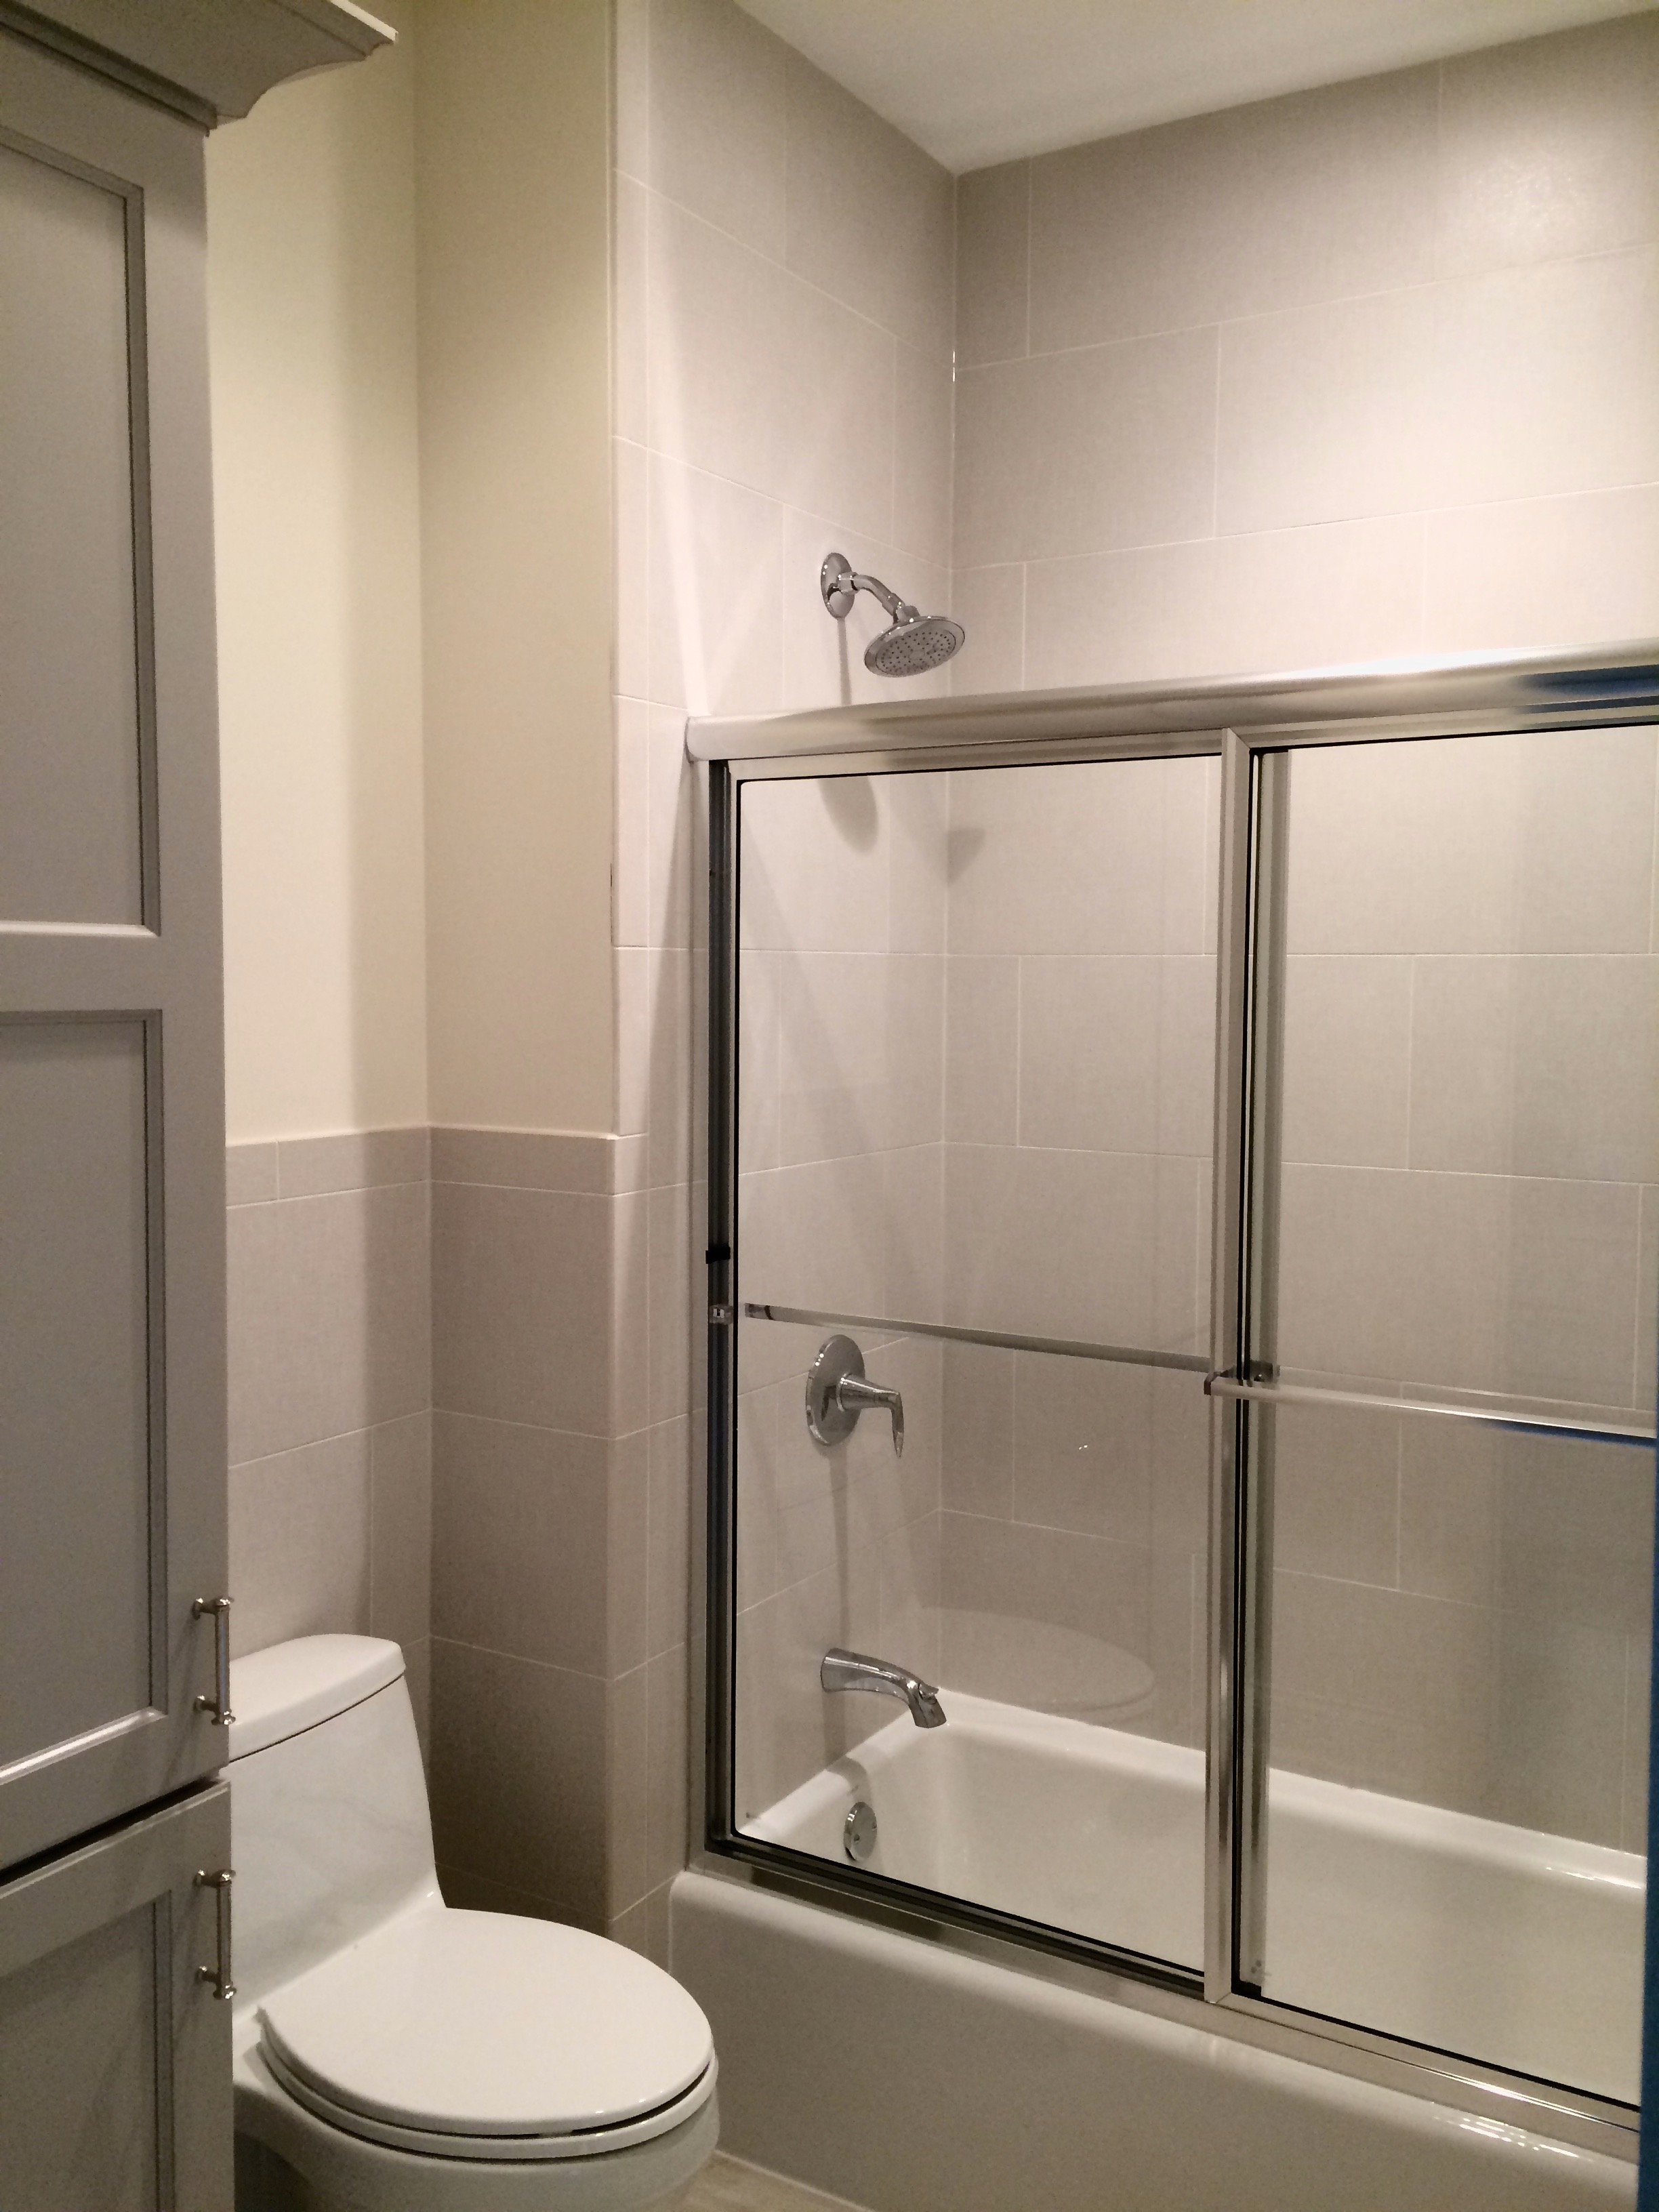 SHARED BATHROOM REMODEL WITH TALL LINEN CLOSET IN GENEVA IL